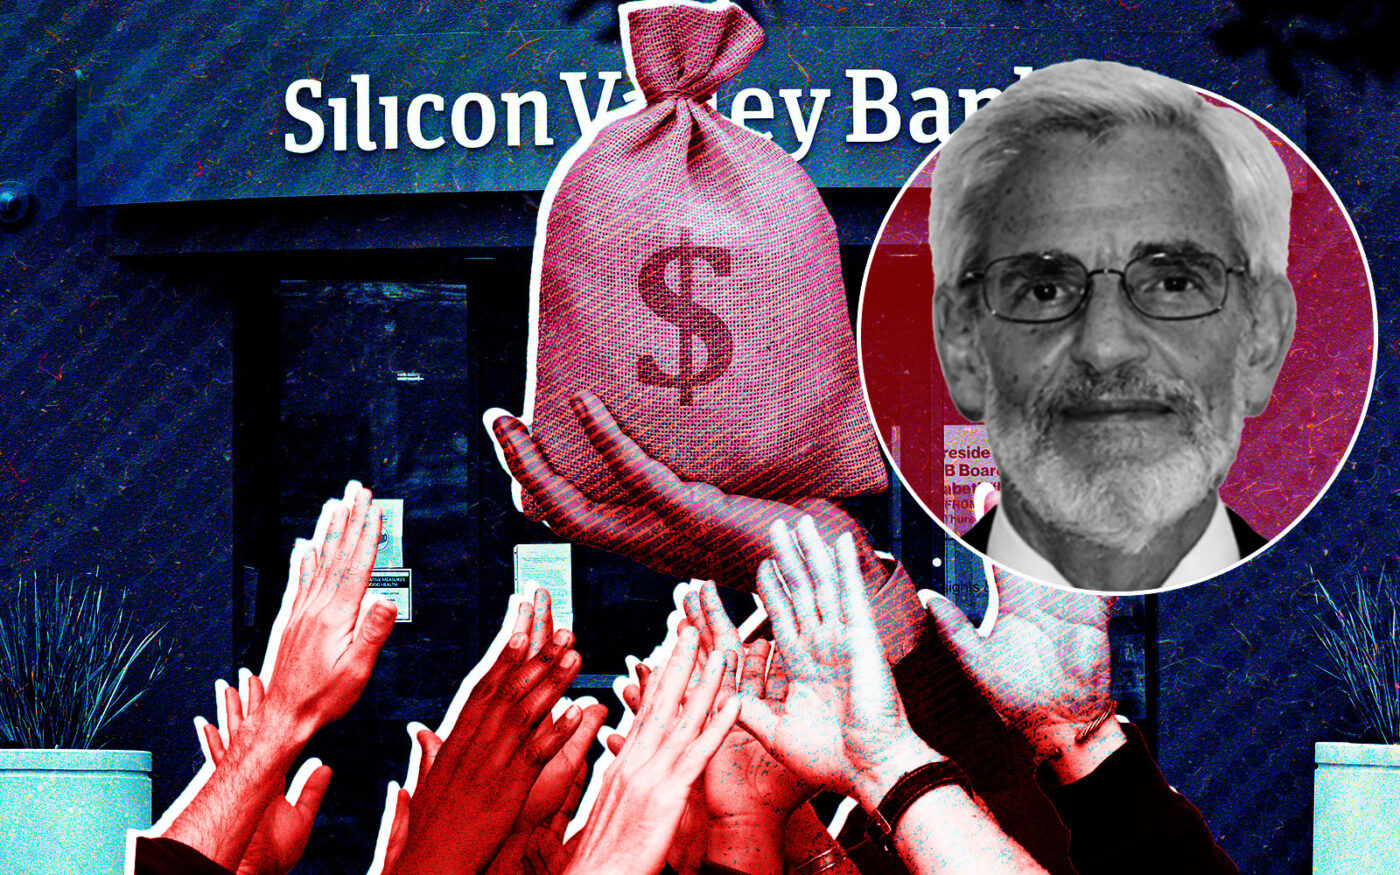 Judge Martin Glenn of the U.S. Bankruptcy Court Southern District of New York and Silicon Valley Bank with and hand holding a bag of money and other hands grabbing for it